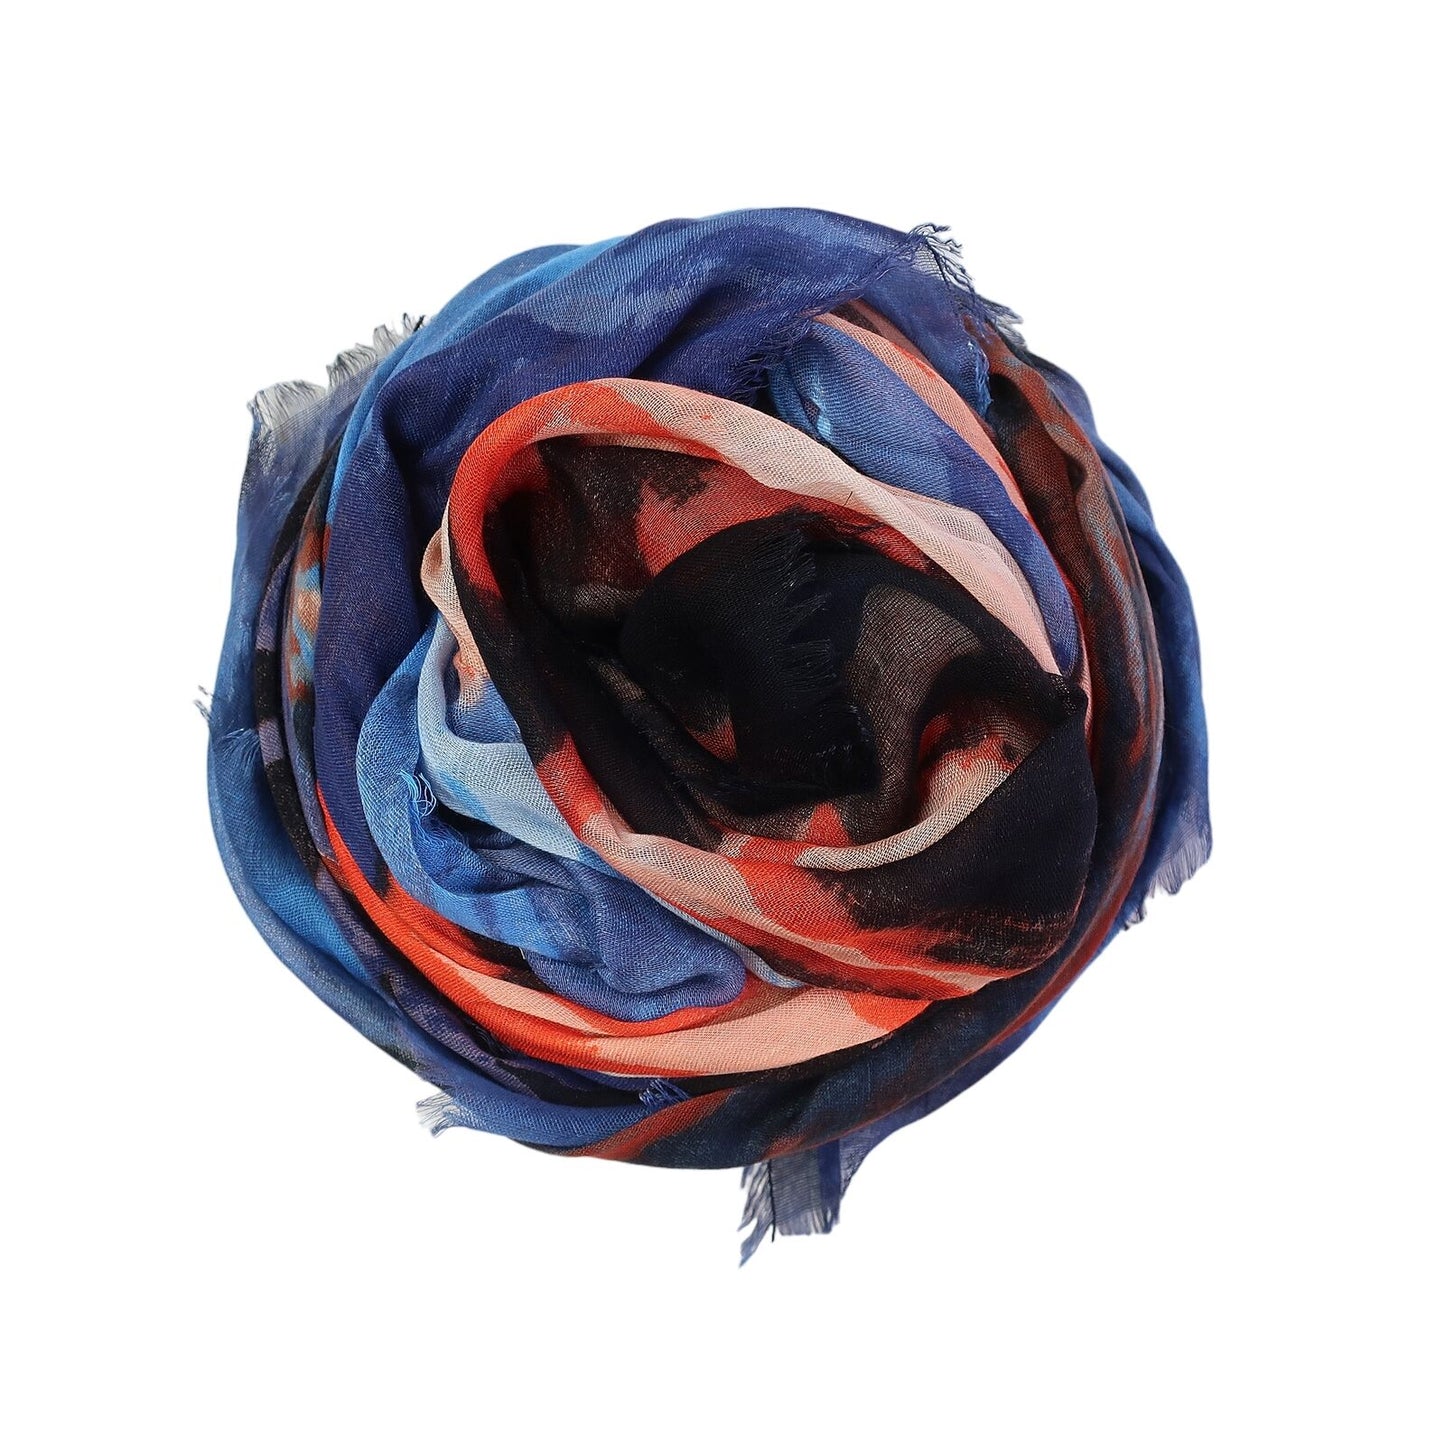 Mermaid Kiss Scarf by Blue Pacific in Navy/Red